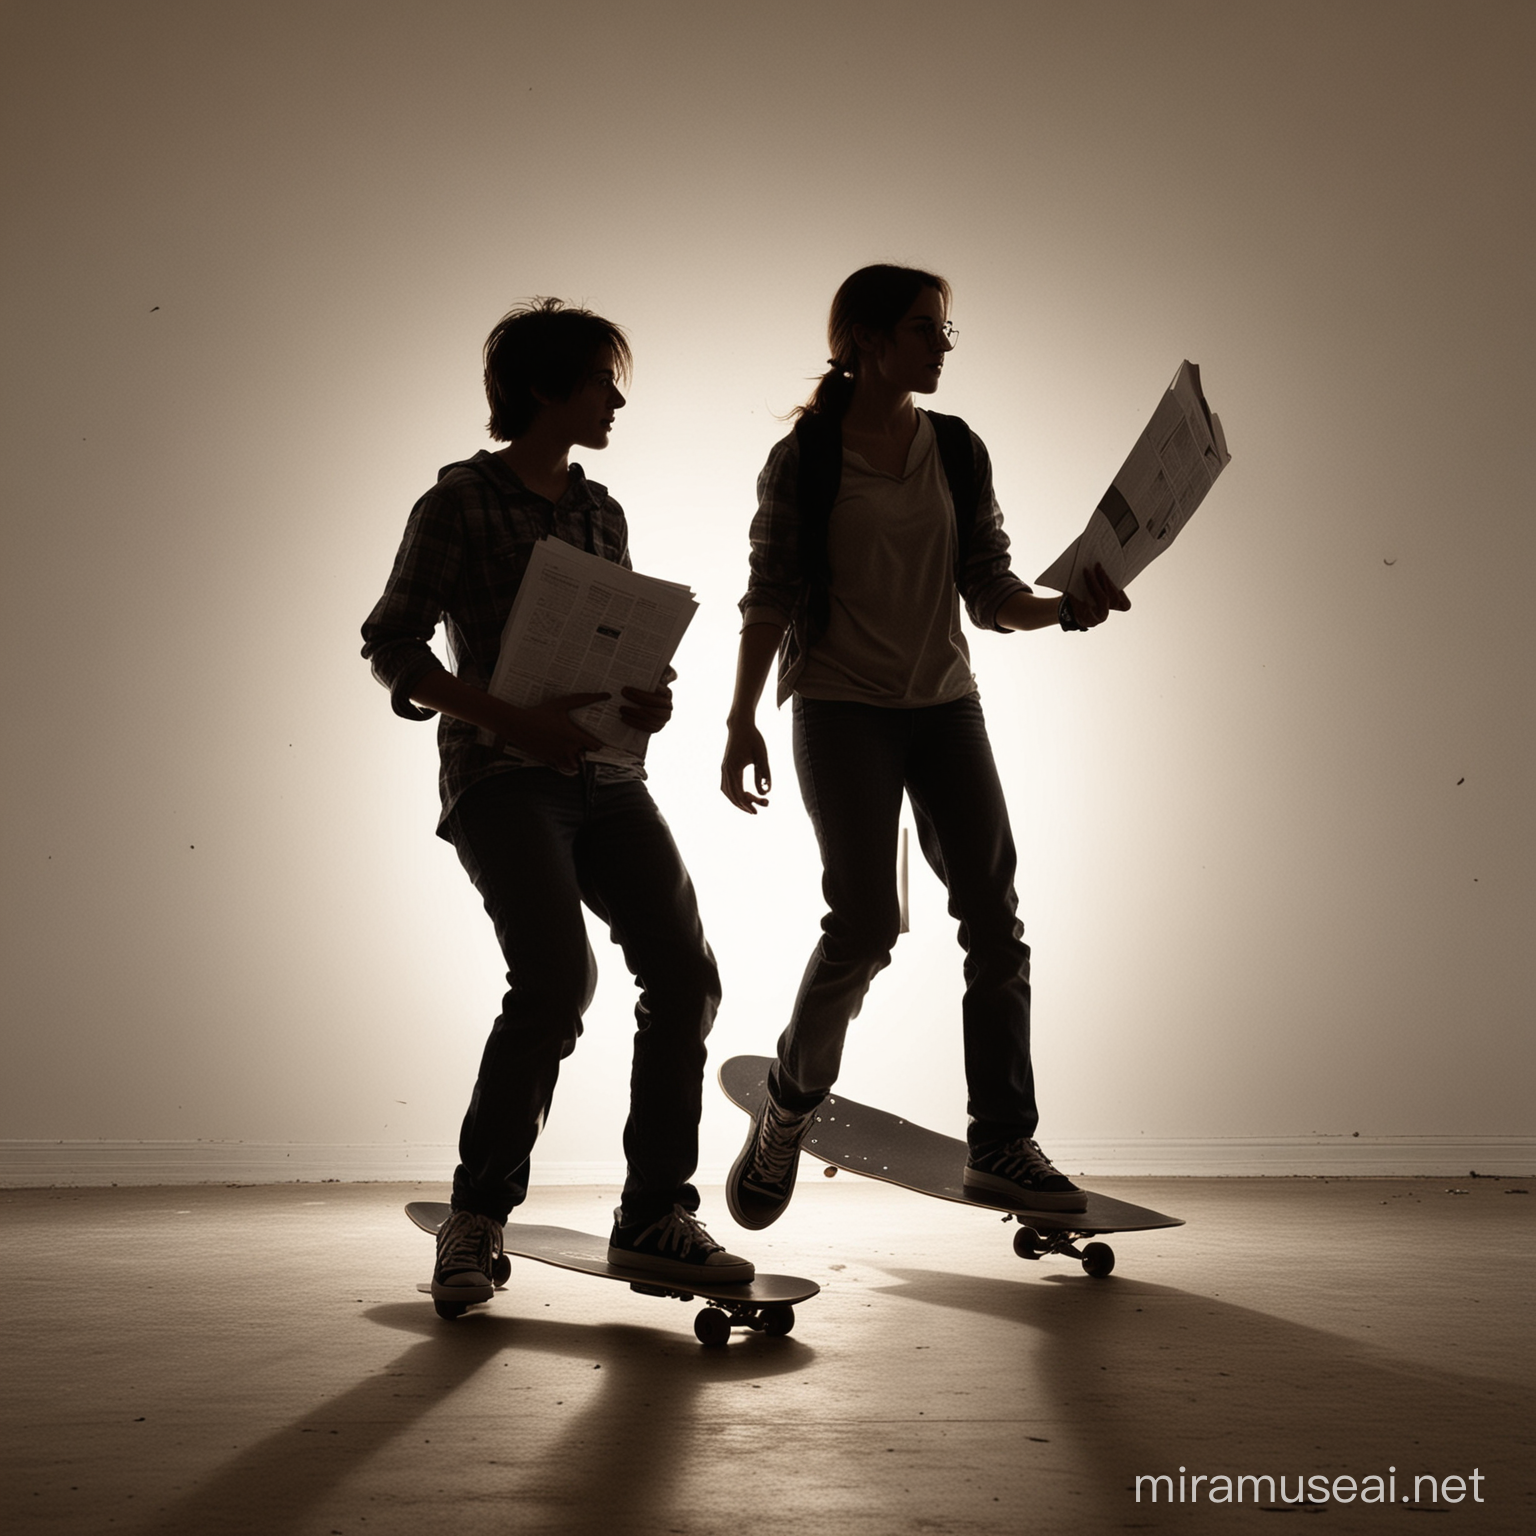 a high school freshman boy is in silhouette riding his skateboard.

 A middle aged woman is trying to catch him

 She is holding a folder.  some of the papers are falling out of the folder. 